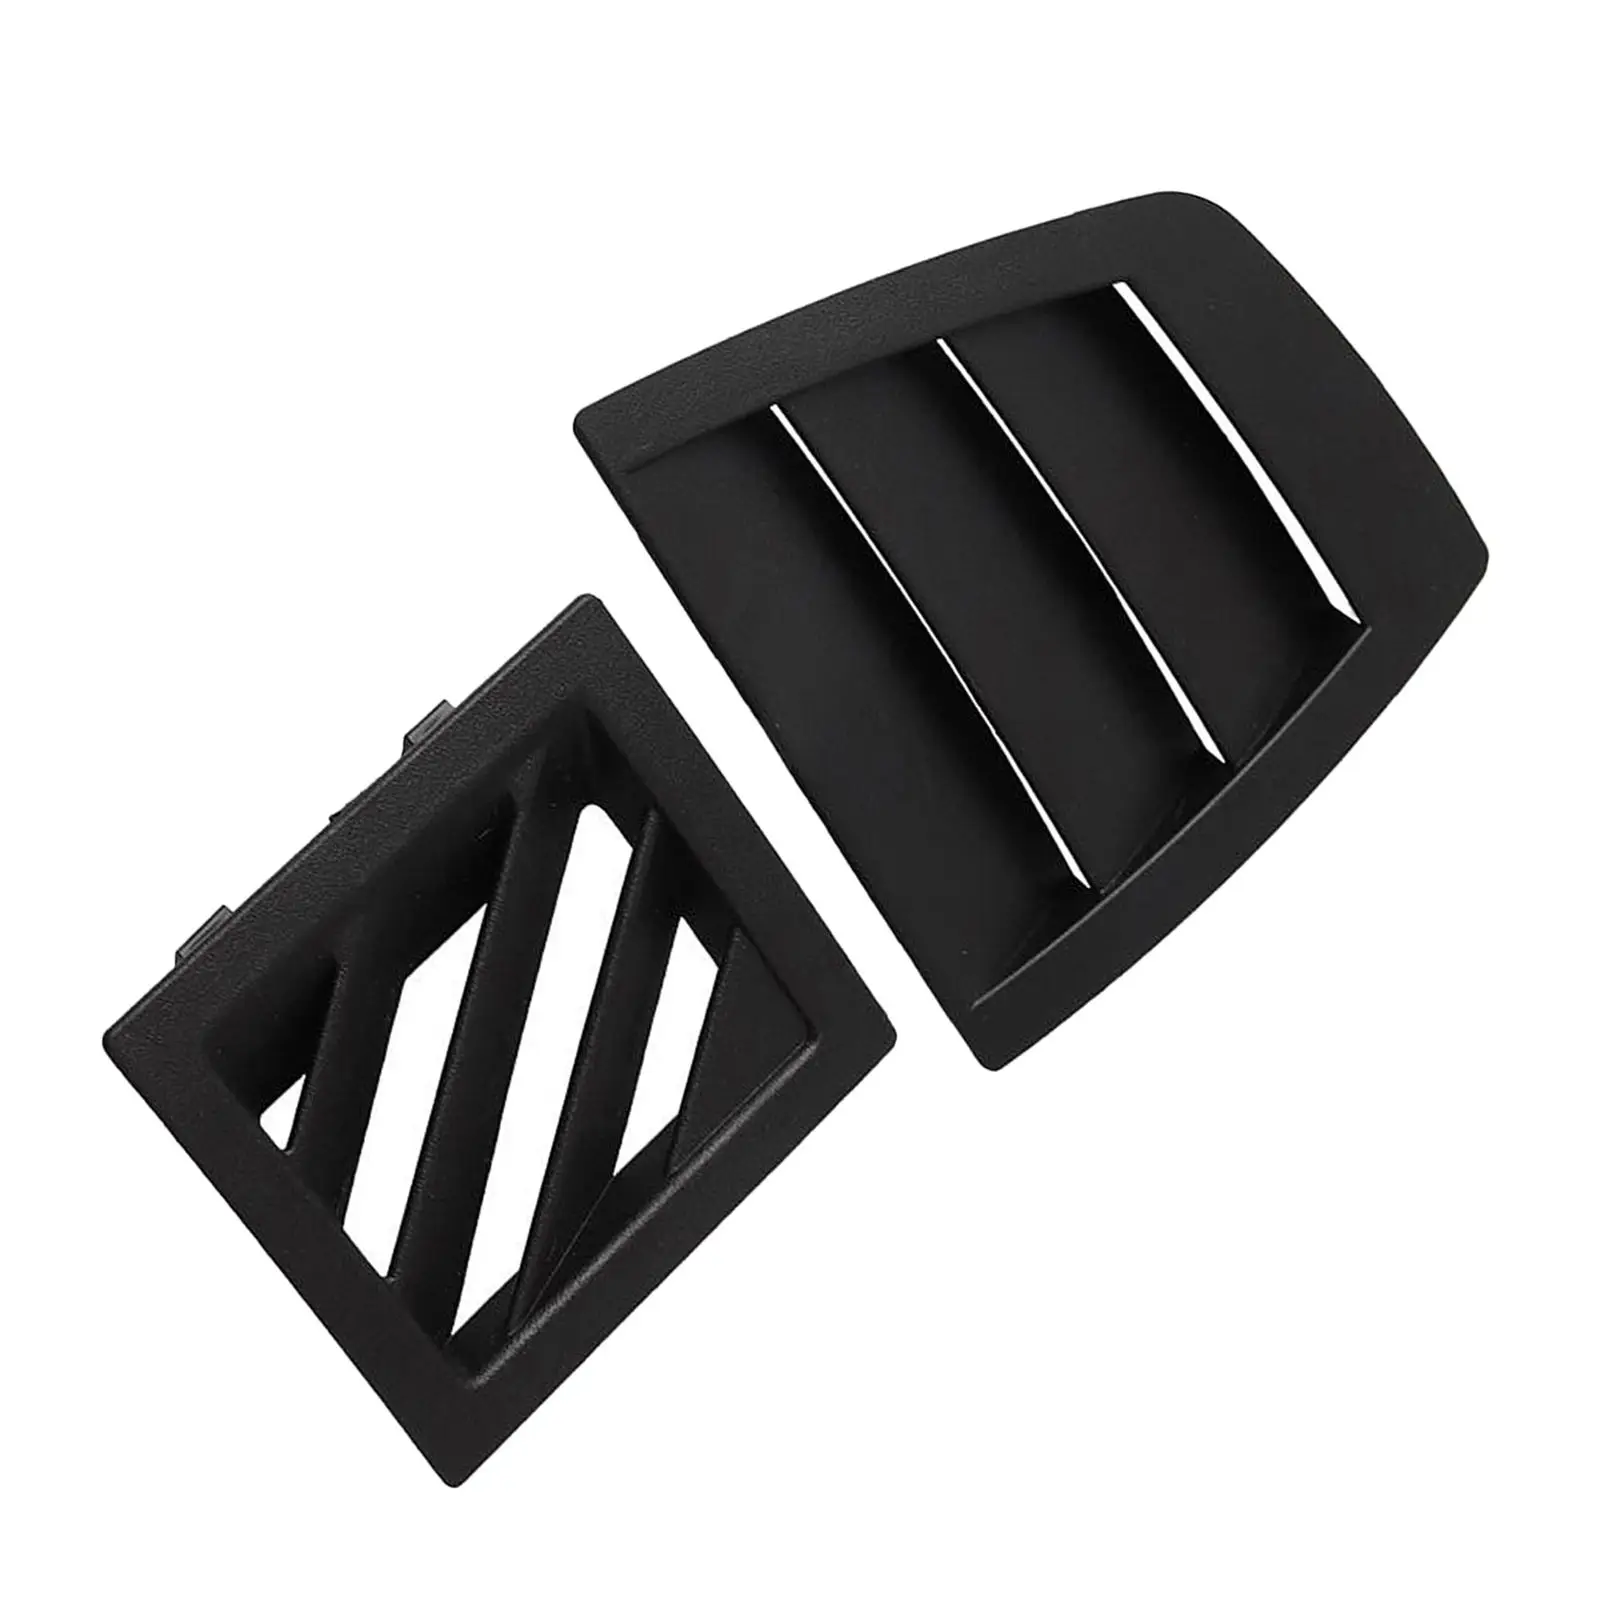 Vehicle  Air Vent Grille Cover Set Replaces Left&Right For 